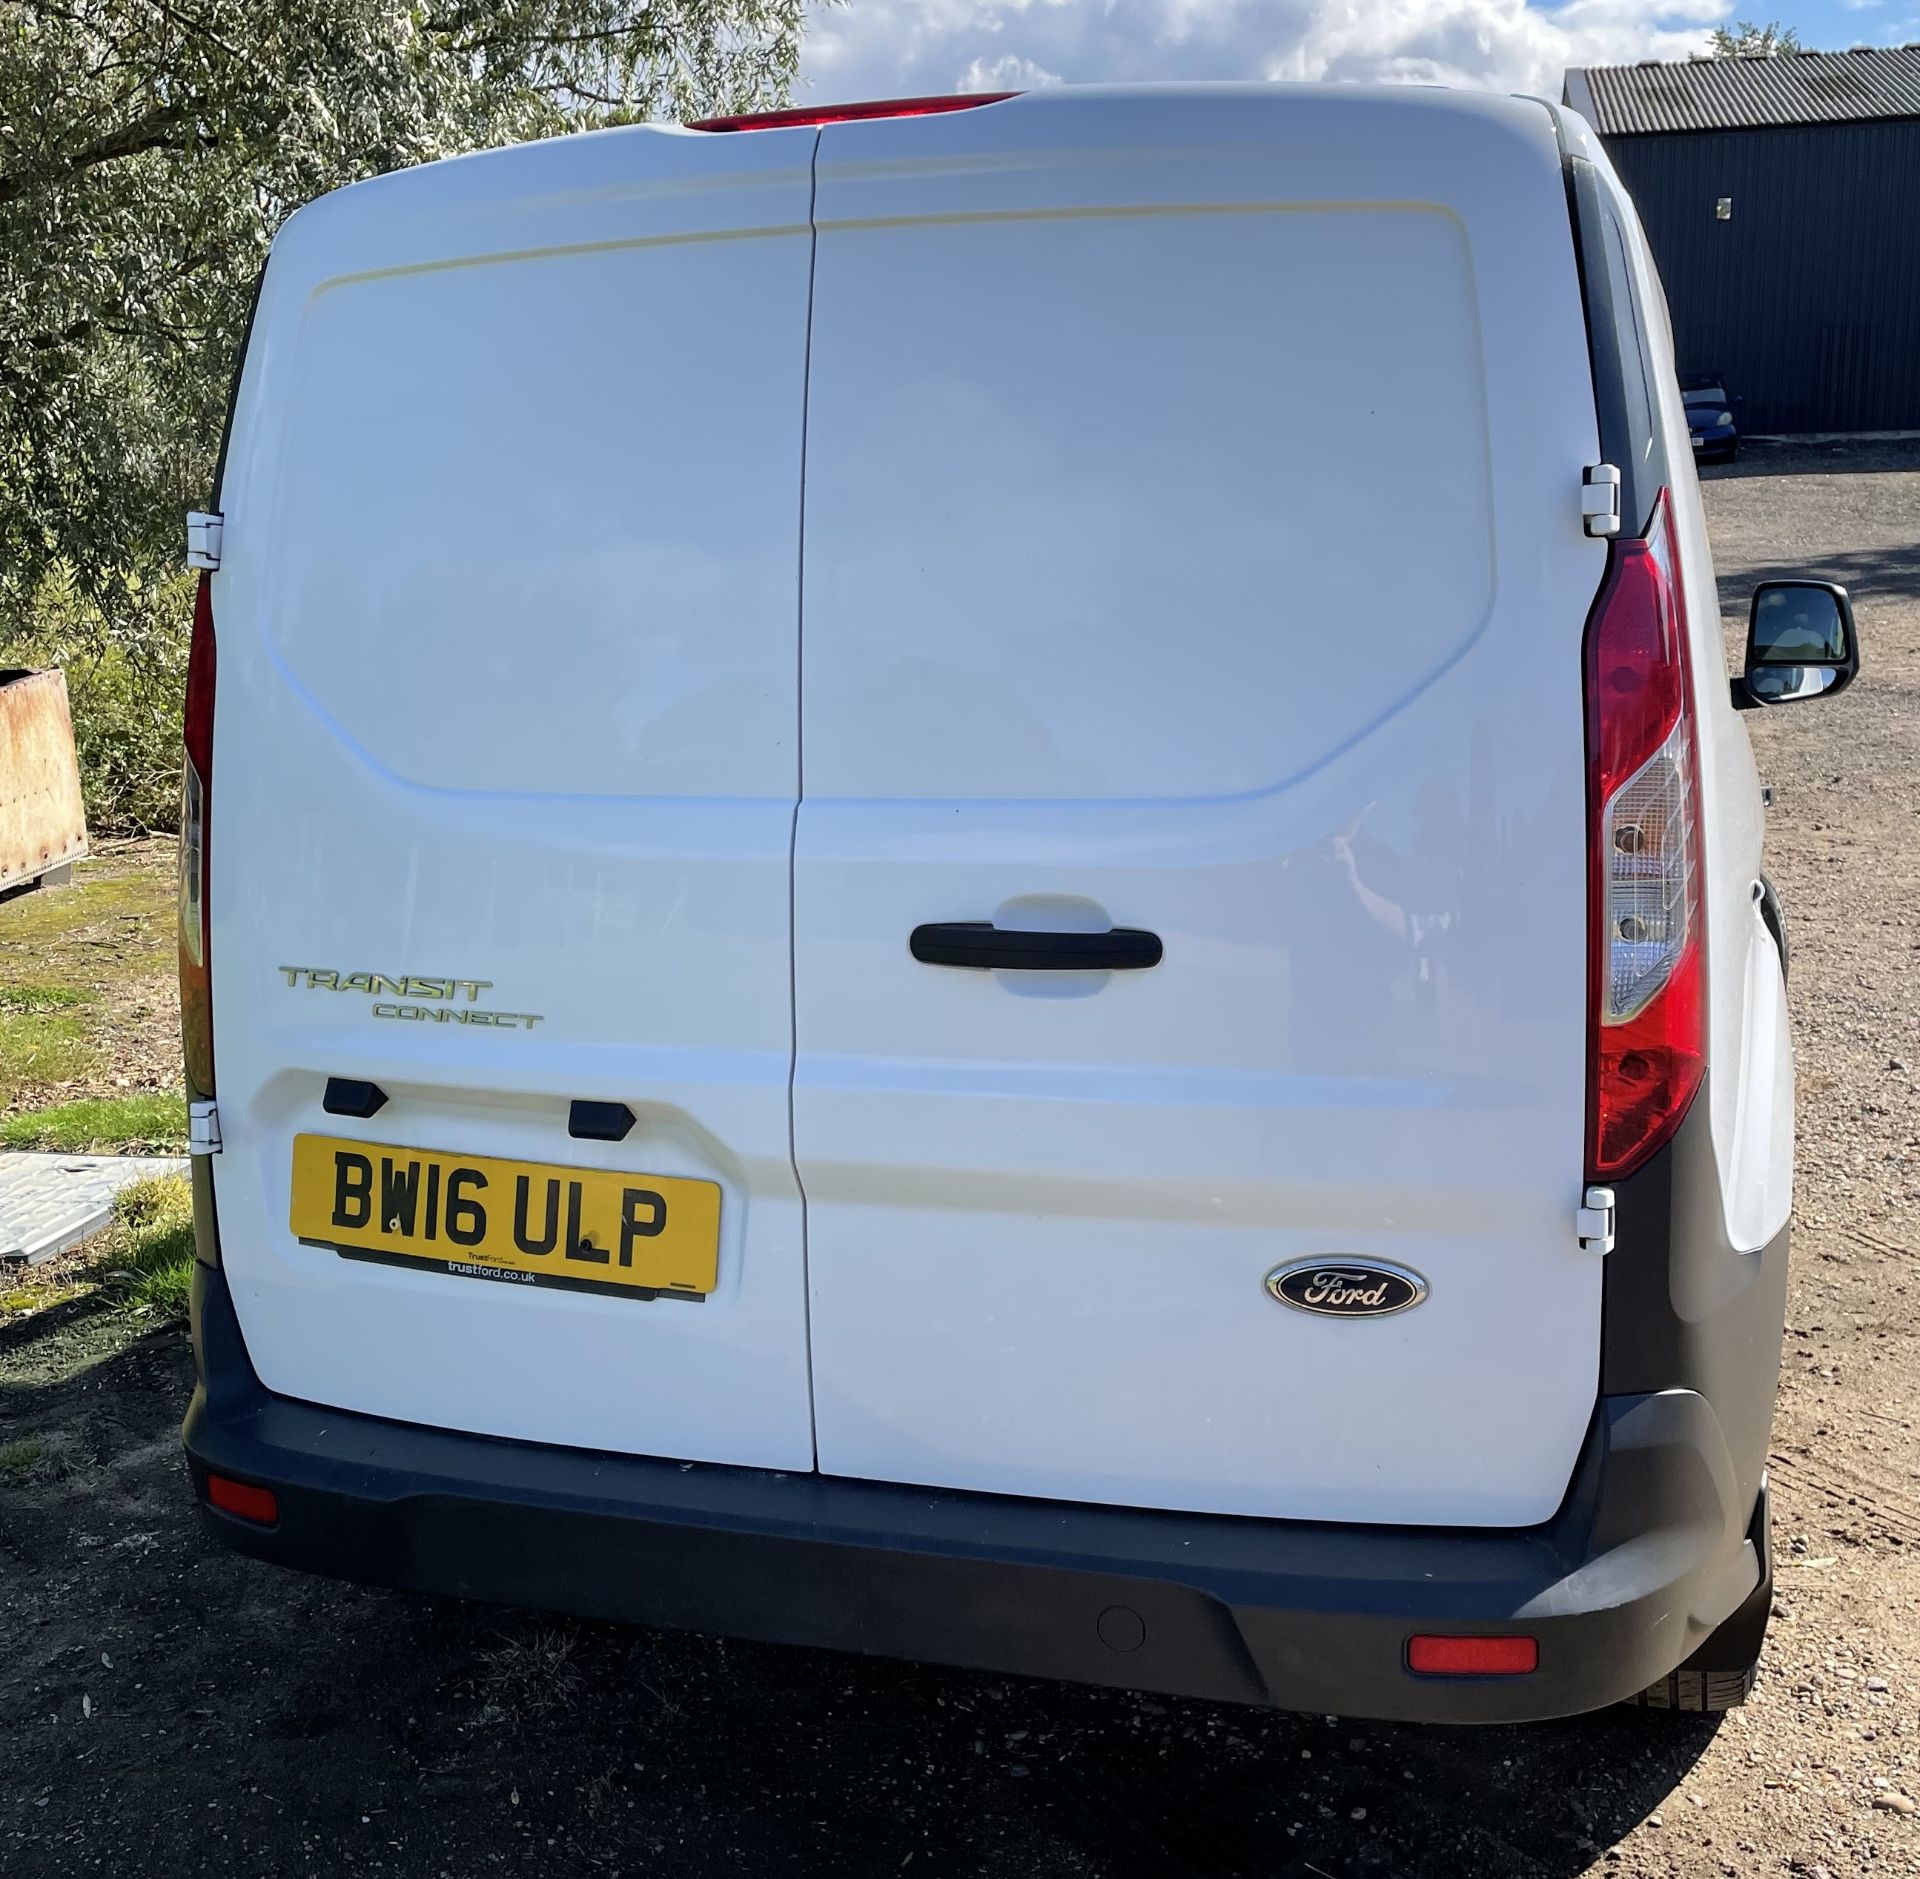 Ford PU2 Transit Connect 200, 1.6 TDCi 75ps Panel Van (Euro 5), Registration BW16 ULP, First - Image 8 of 21